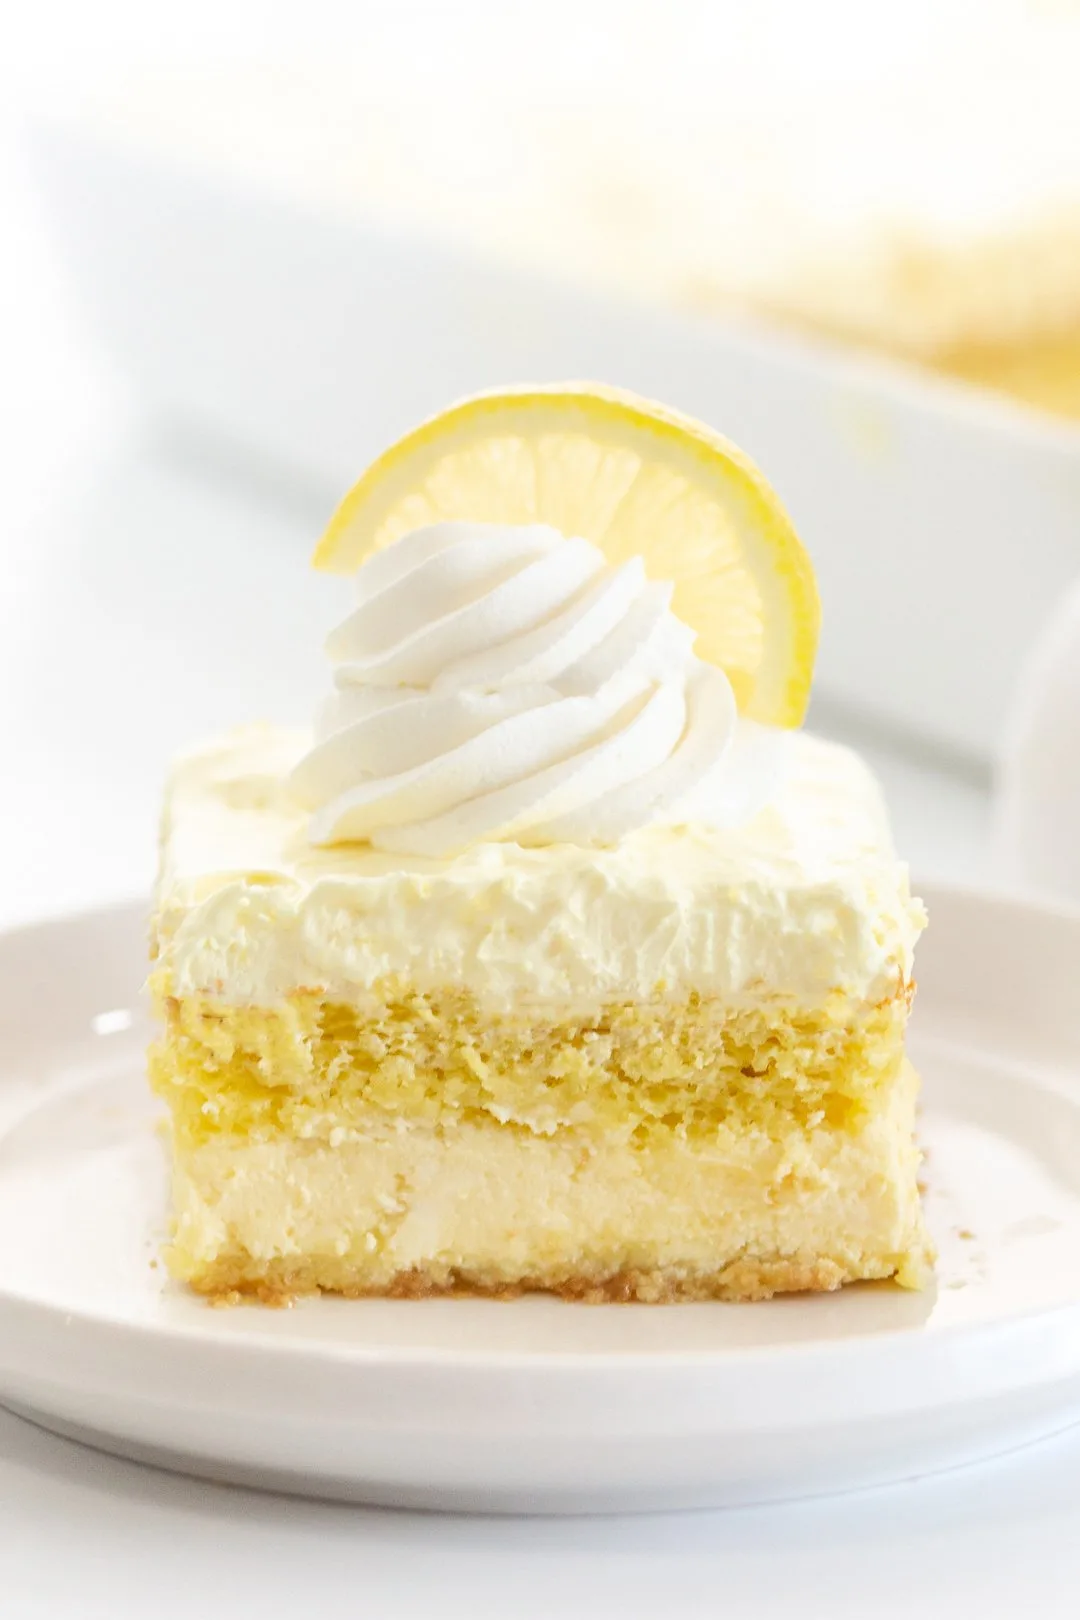 up close view of layered lemon cake on a small white plate. garnished with whipped cream and half slice of lemon